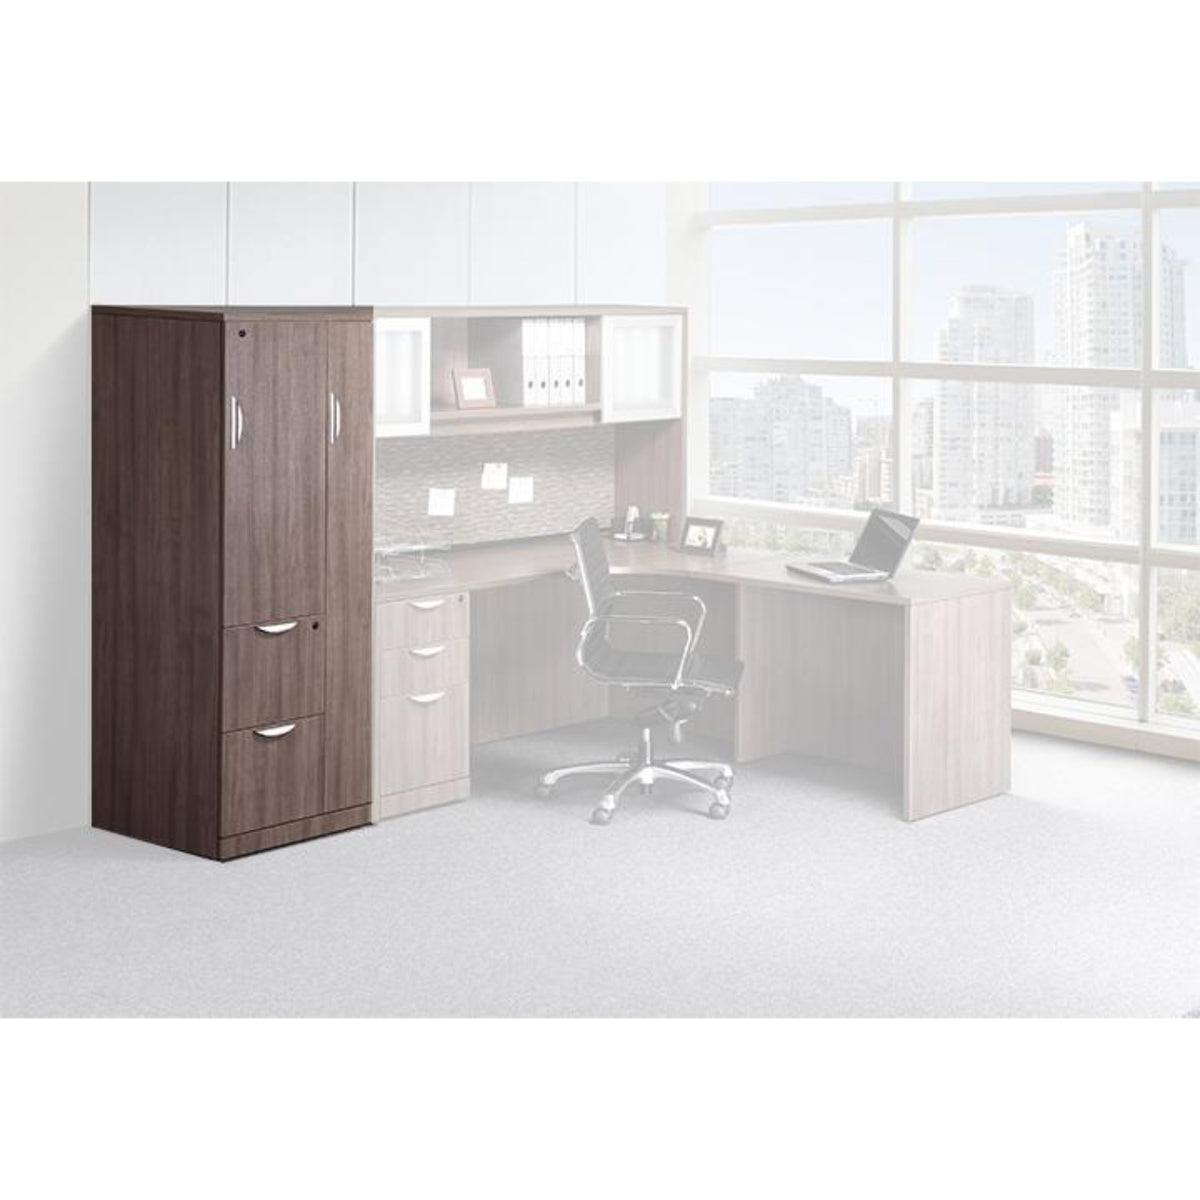 Performance - Combination Laminate Tower with Wardrobe - Duckys Office Furniture